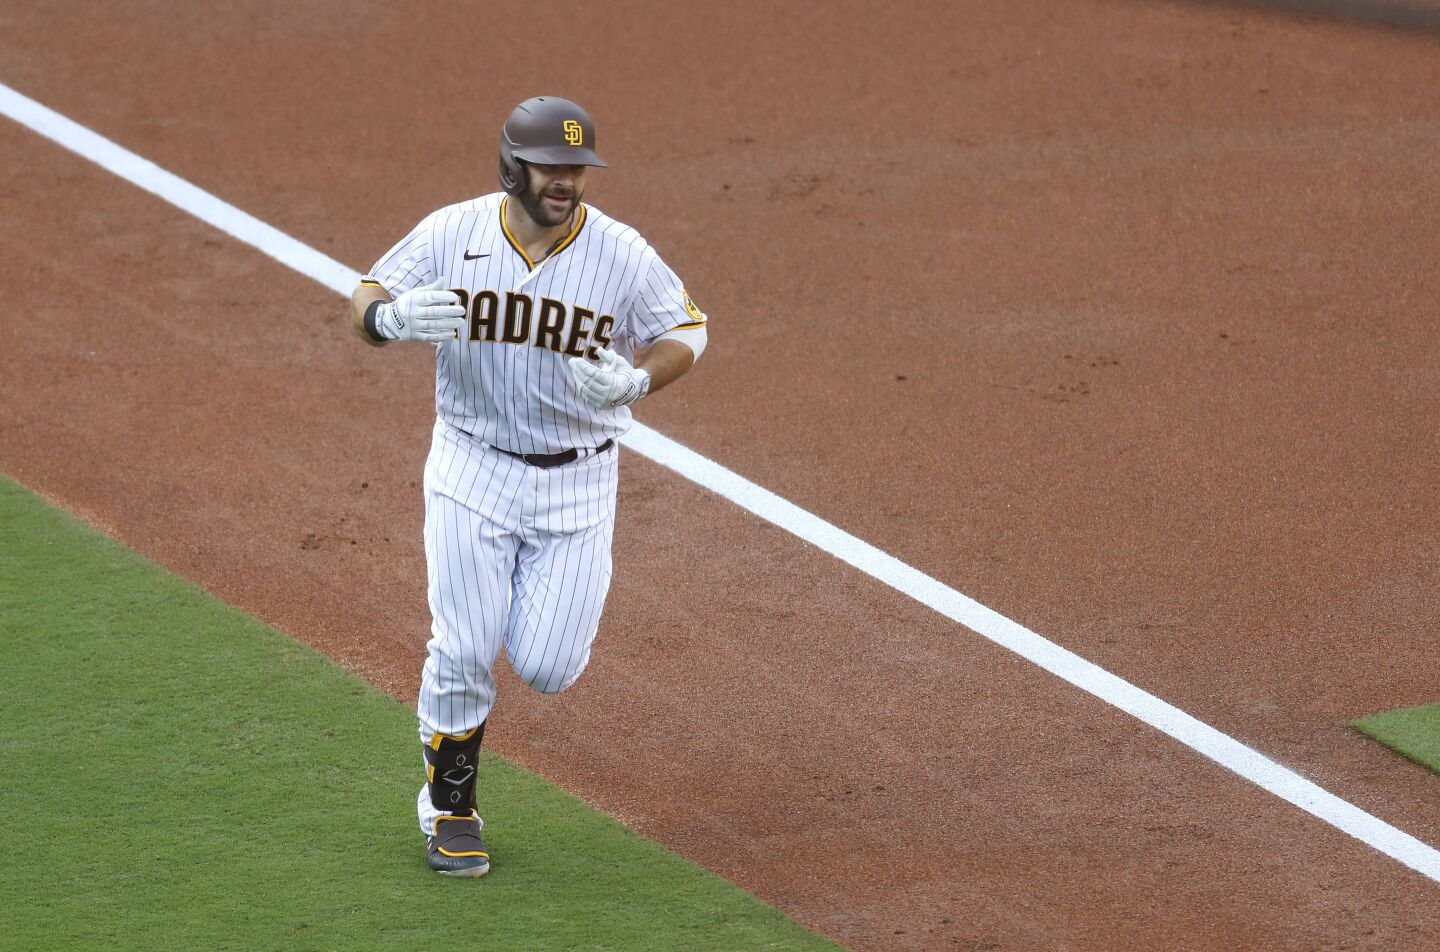 San Diego Padres Mitch Moreland rounds third base after hitting a two-run home run in the 1st inning against the Colorado Rockies on Wednesday, Sept. 9, 2020.